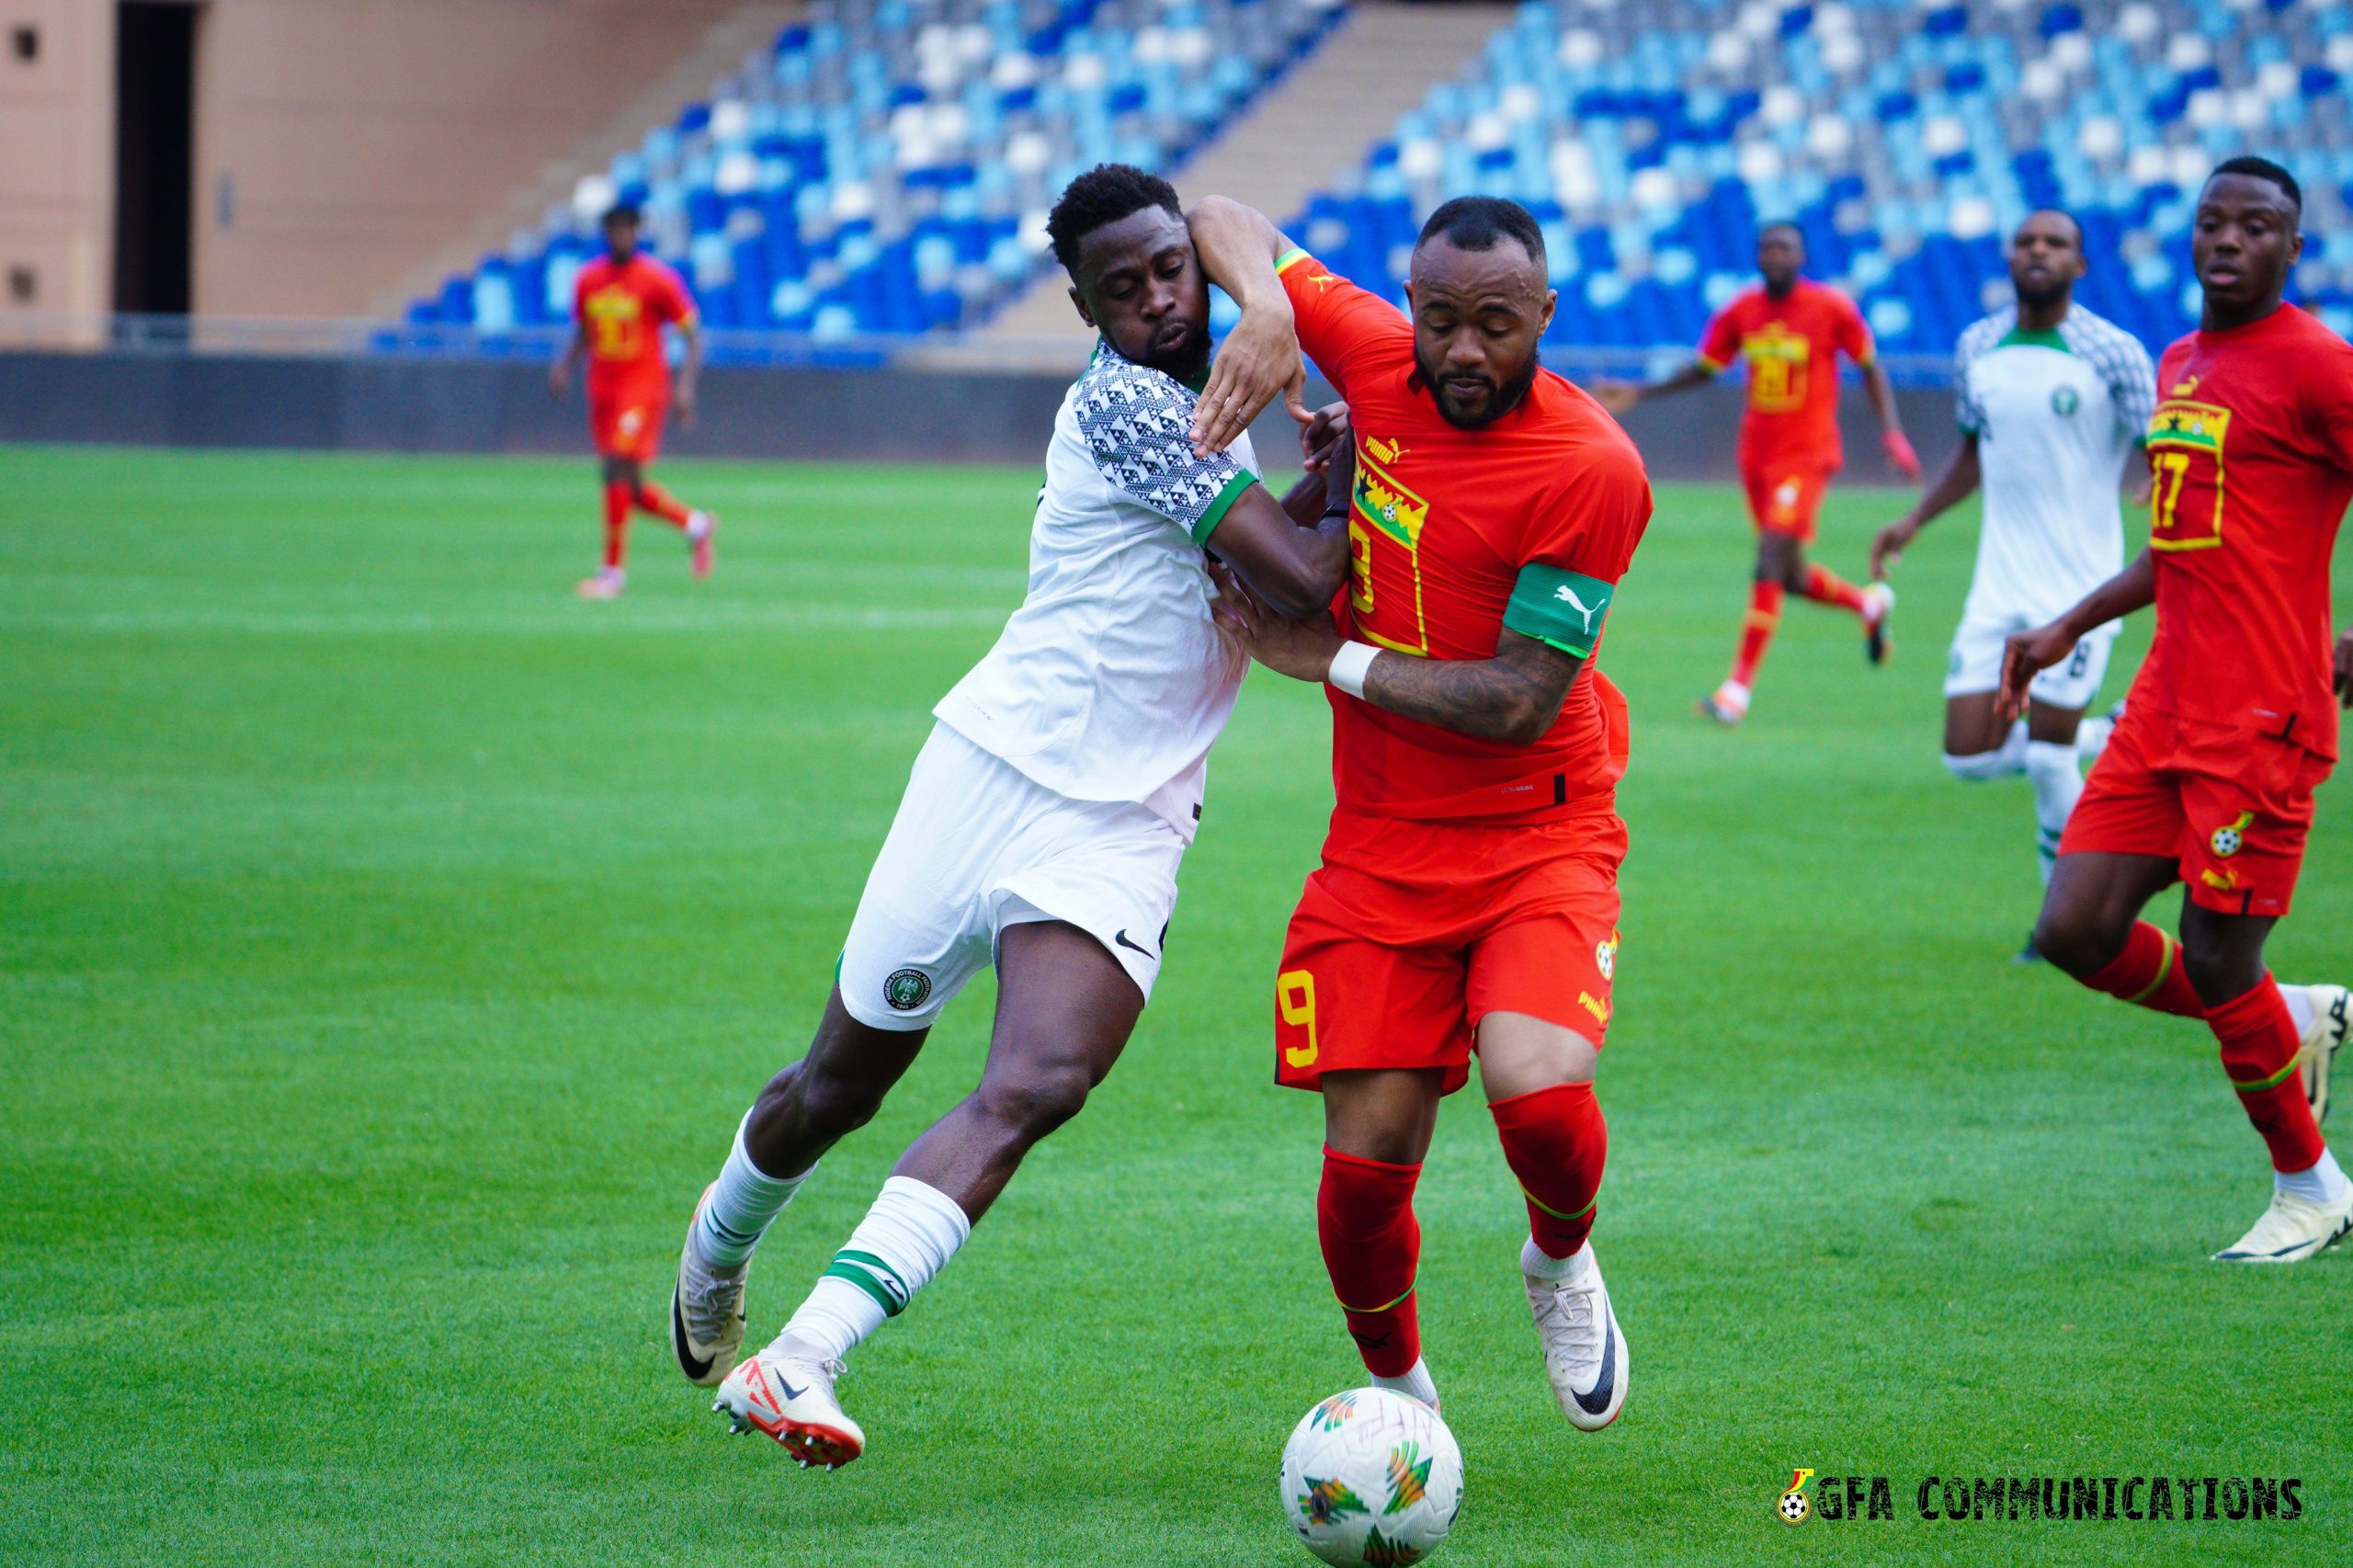 Jordan Ayew challenged by a Nigerian player during their friendly match at the Stade de Marrakech